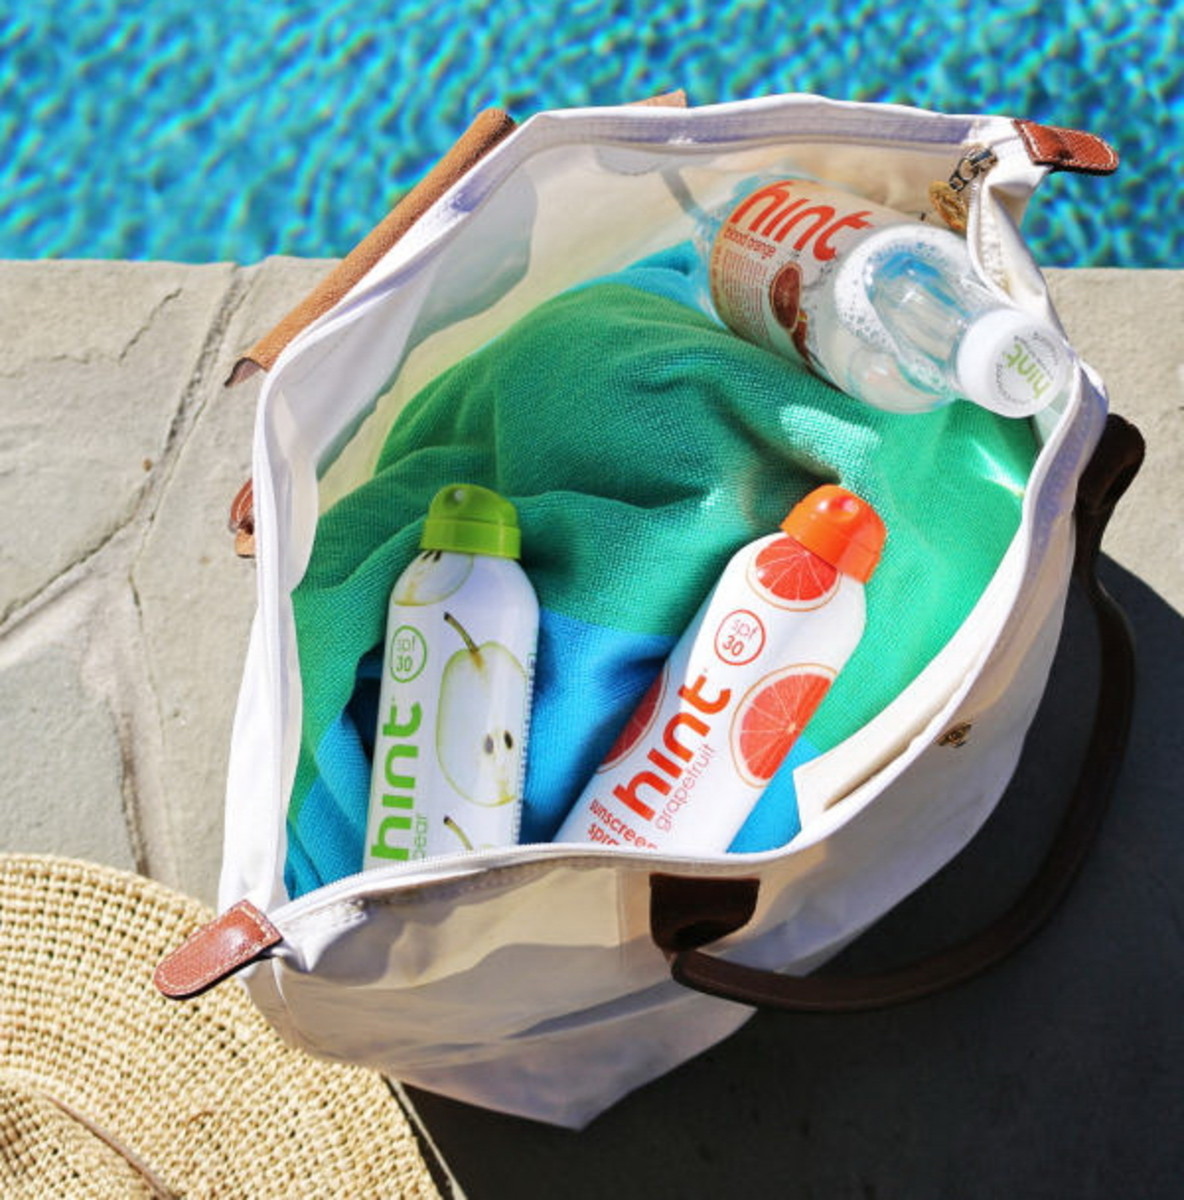 take a break from chemi-coconut scented sunscreens with fruitiness from Hint.